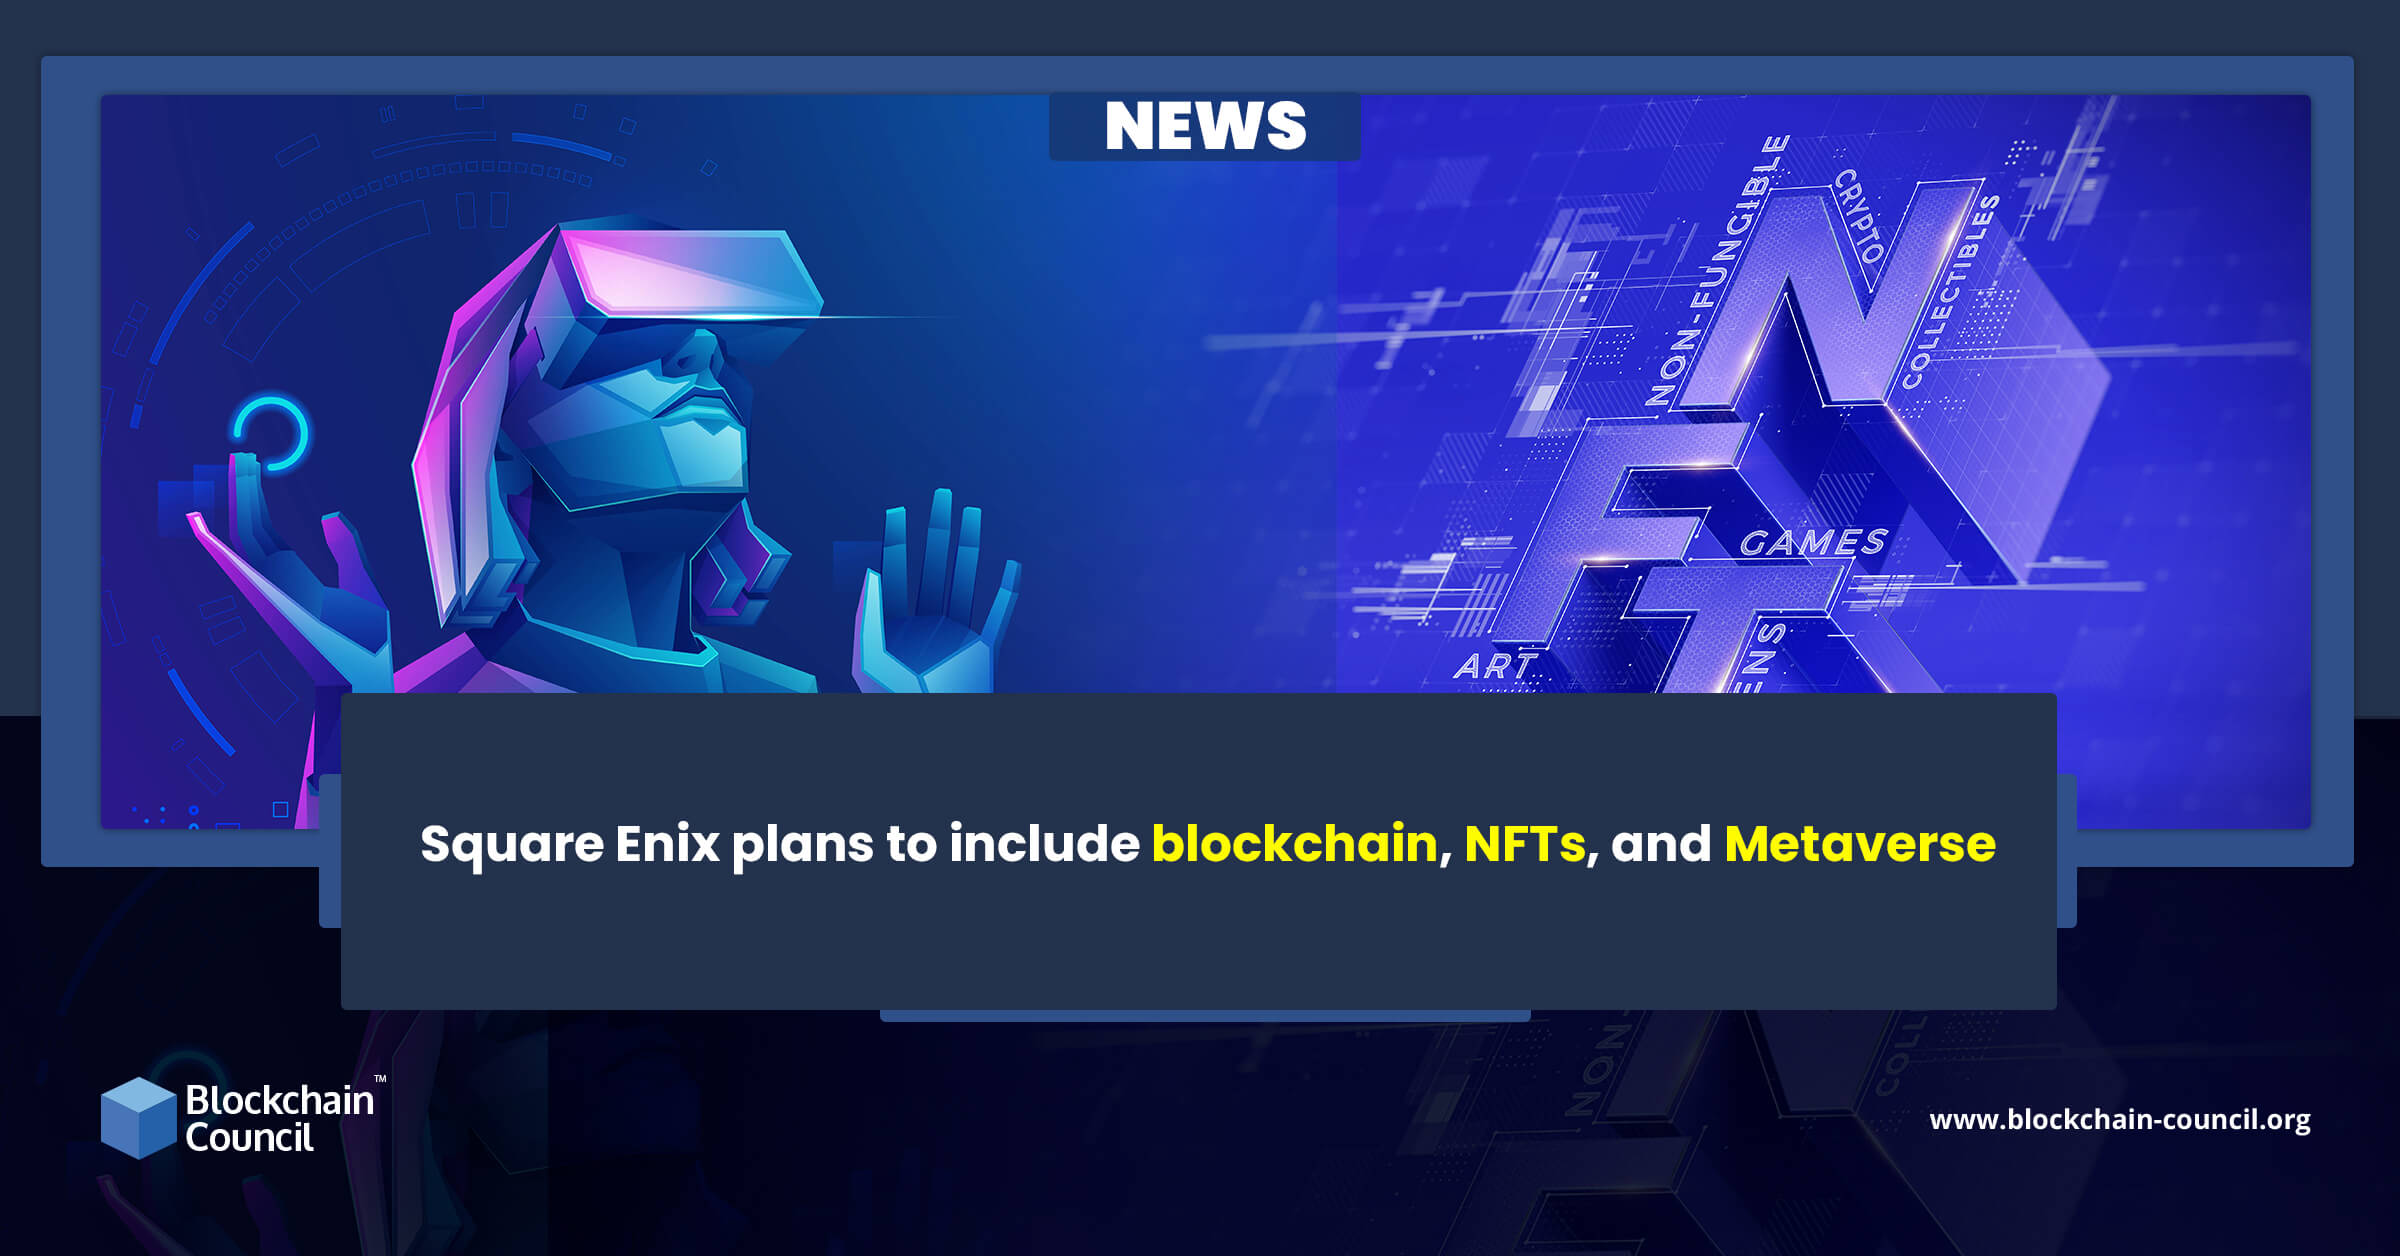 Square Enix plans to include blockchain, NFTs, and Metaverse news emailer